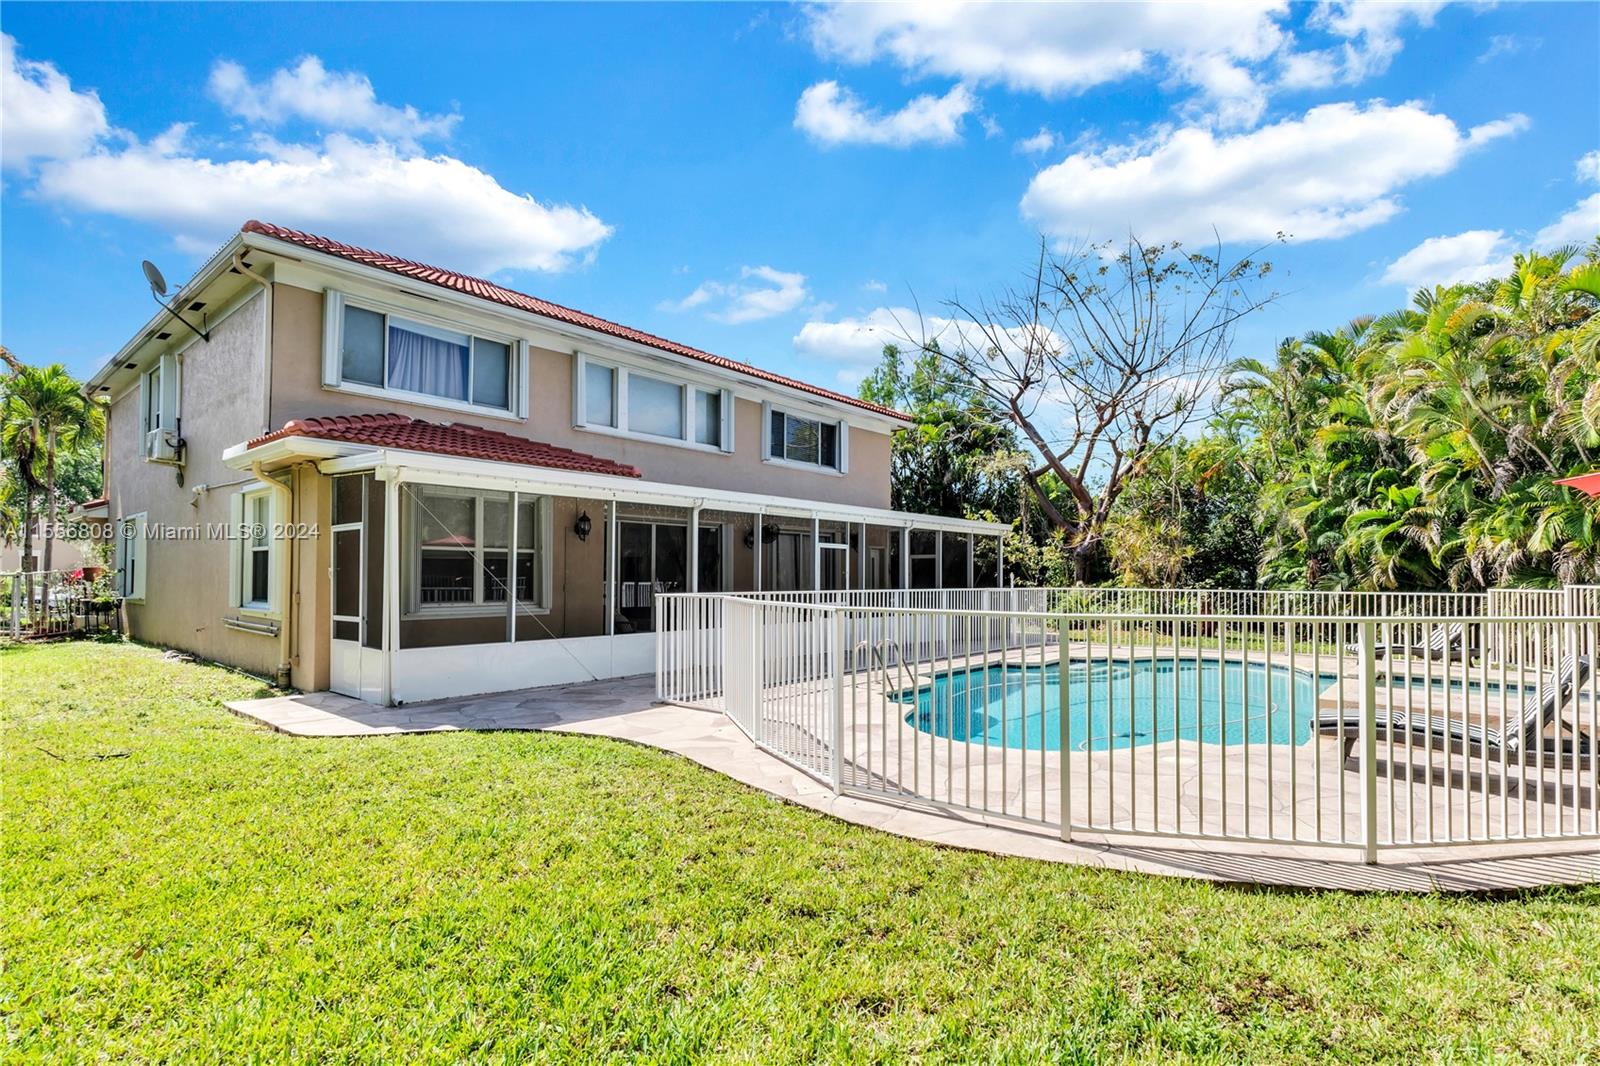 5280 NW 95th Ave, Coral Springs, Florida 33076, 6 Bedrooms Bedrooms, ,3 BathroomsBathrooms,Residential,For Sale,5280 NW 95th Ave,A11556808